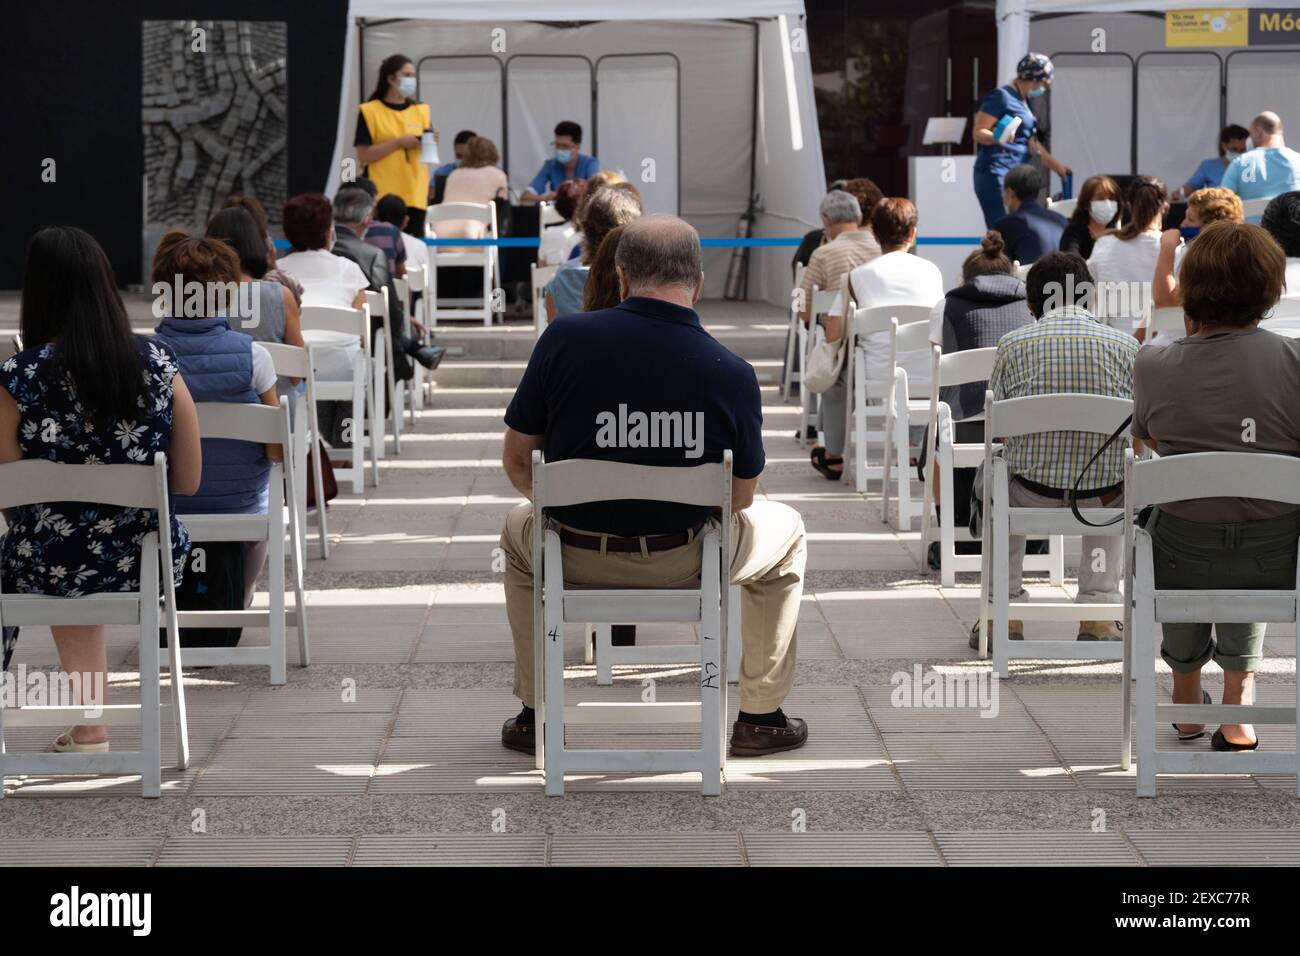 Santiago, Metropolitana, Chile. 4th Mar, 2021. A group of people wait to receive their first or second dose of the Sinovac vaccine against the coronavirus depending on the vaccination schedule, at a vaccination center in Santiago. Credit: Matias Basualdo/ZUMA Wire/Alamy Live News Stock Photo